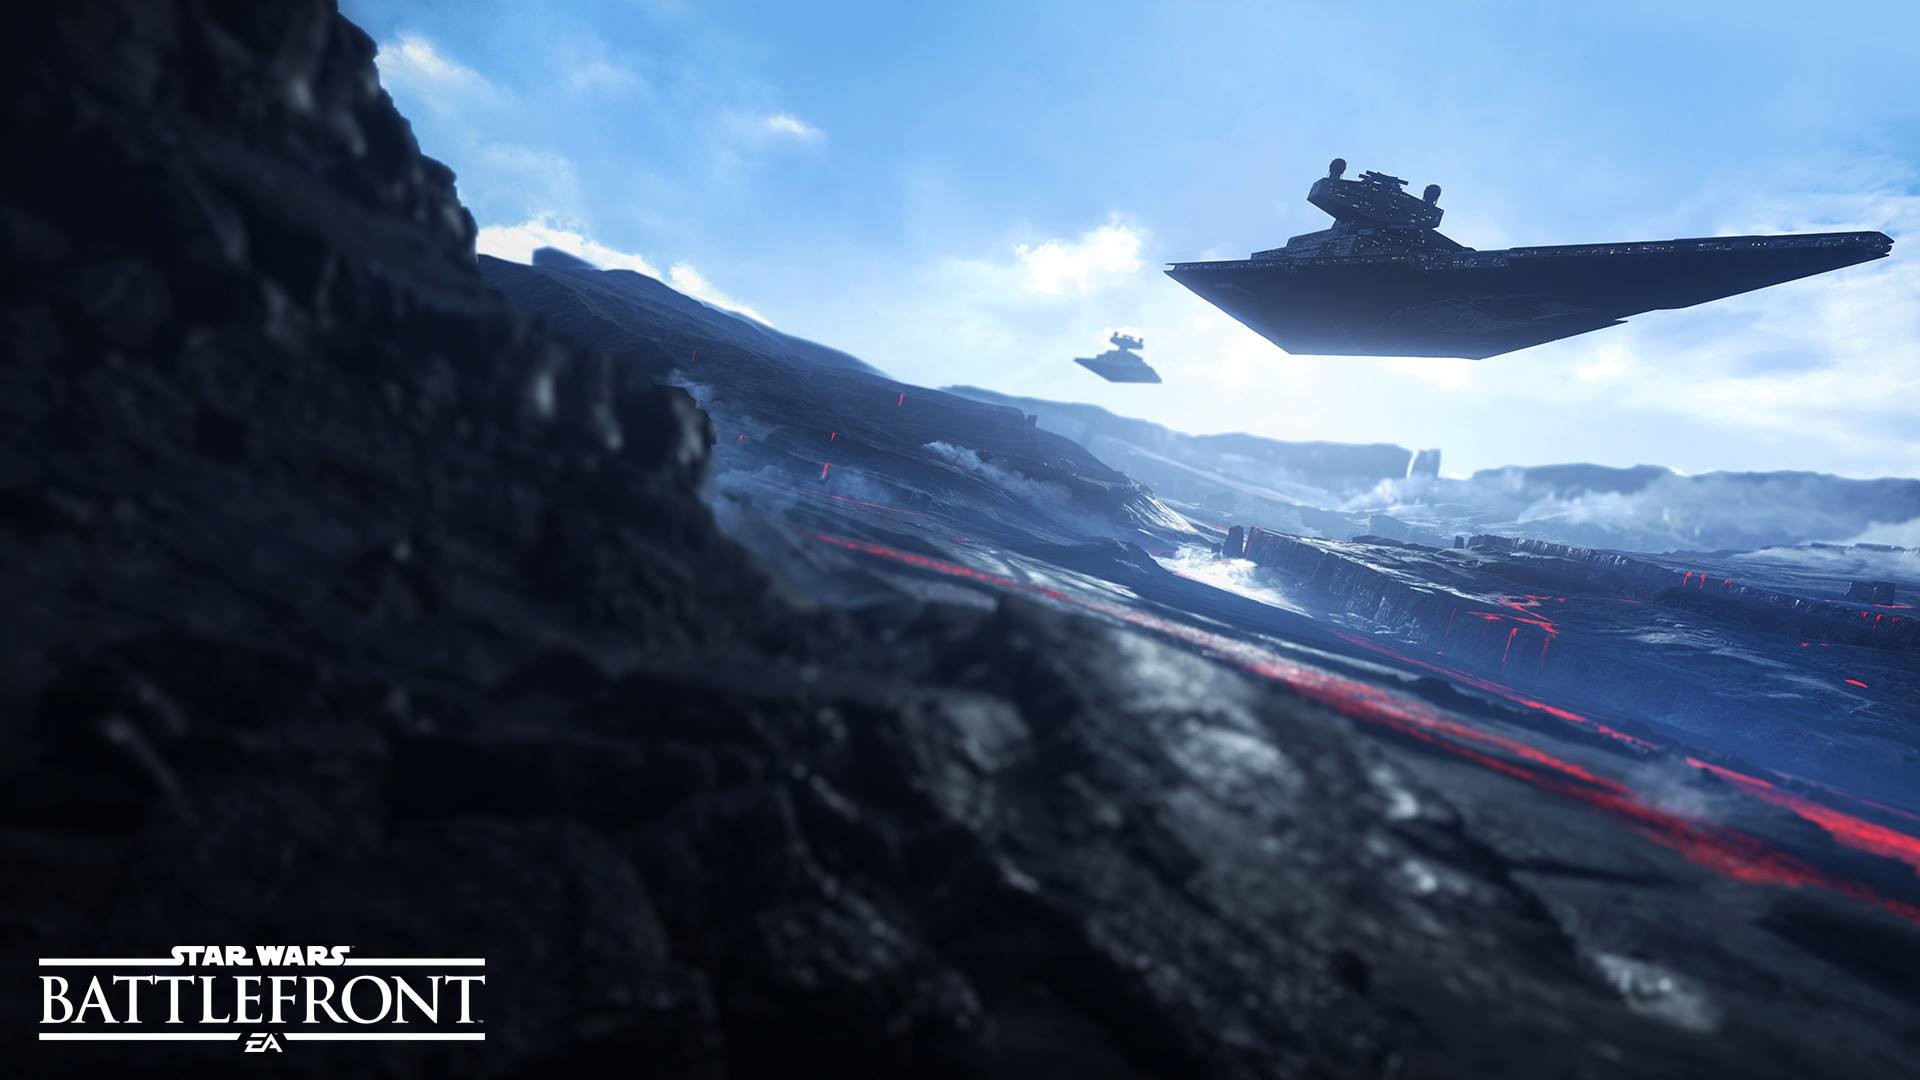 1920x1080 Here Are Some Glorious Star Wars Battlefront HD Wallpapers - GameSpot